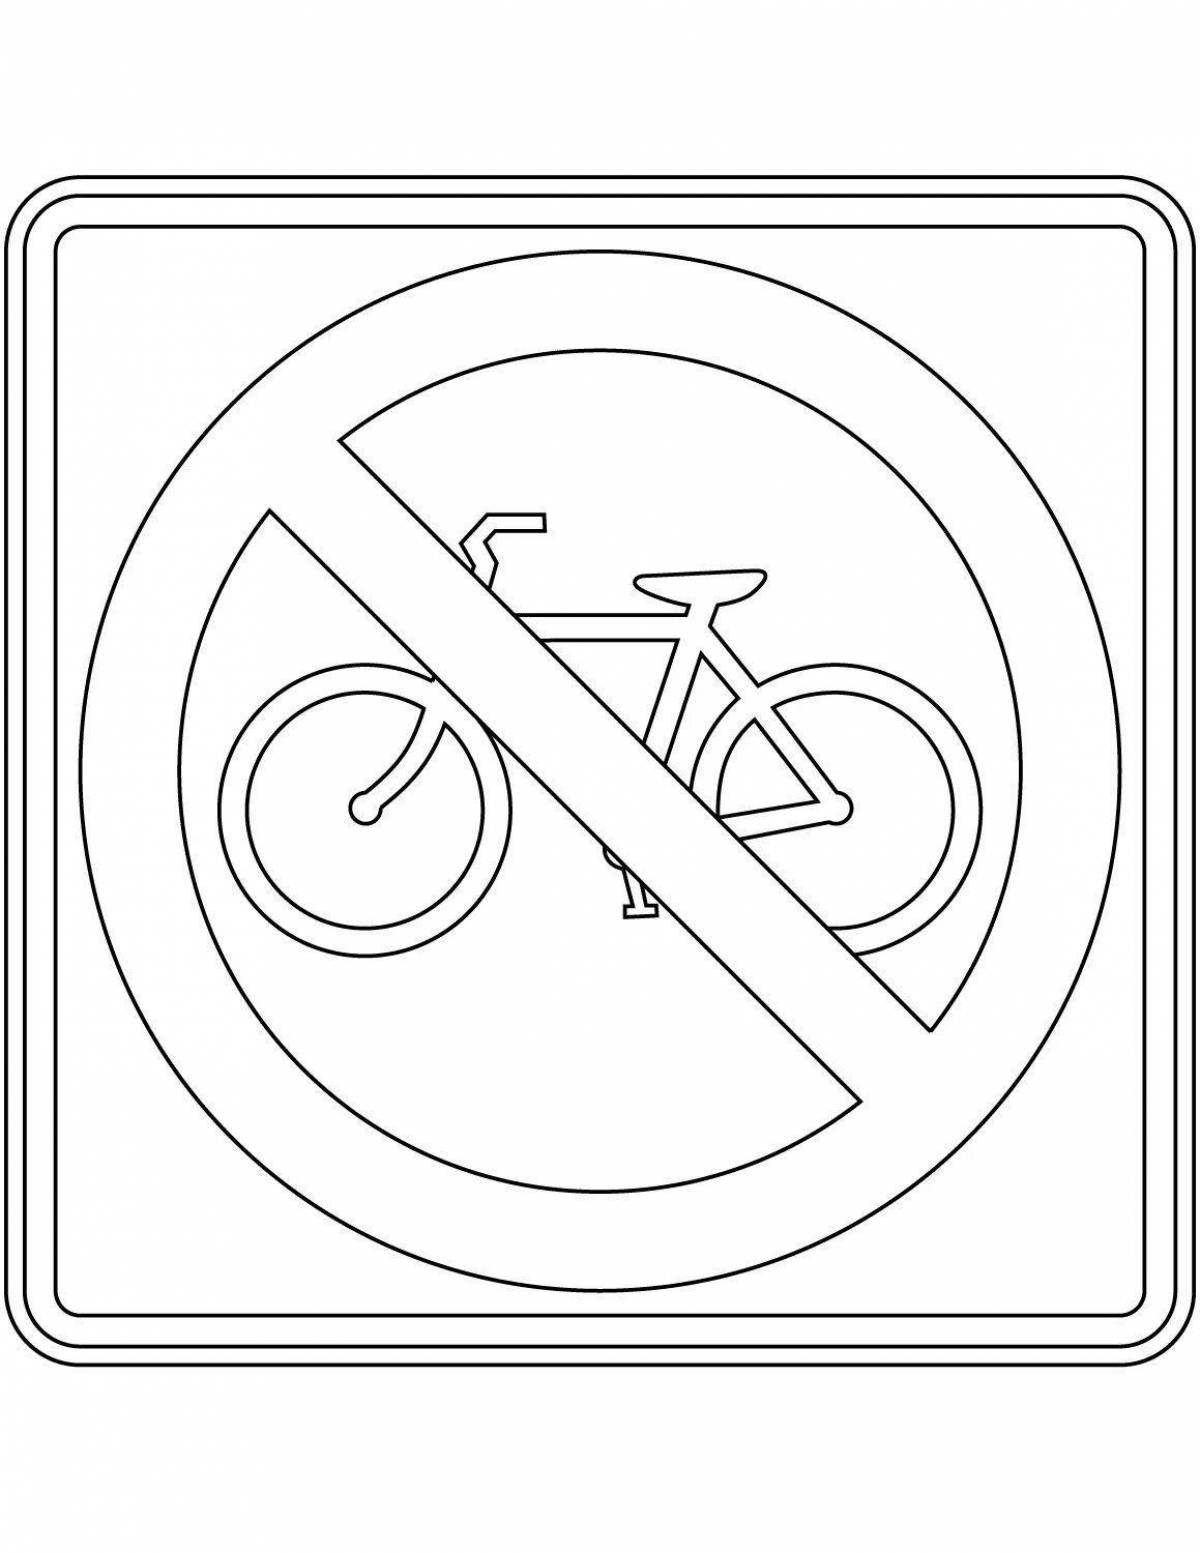 Playful safety sign coloring page